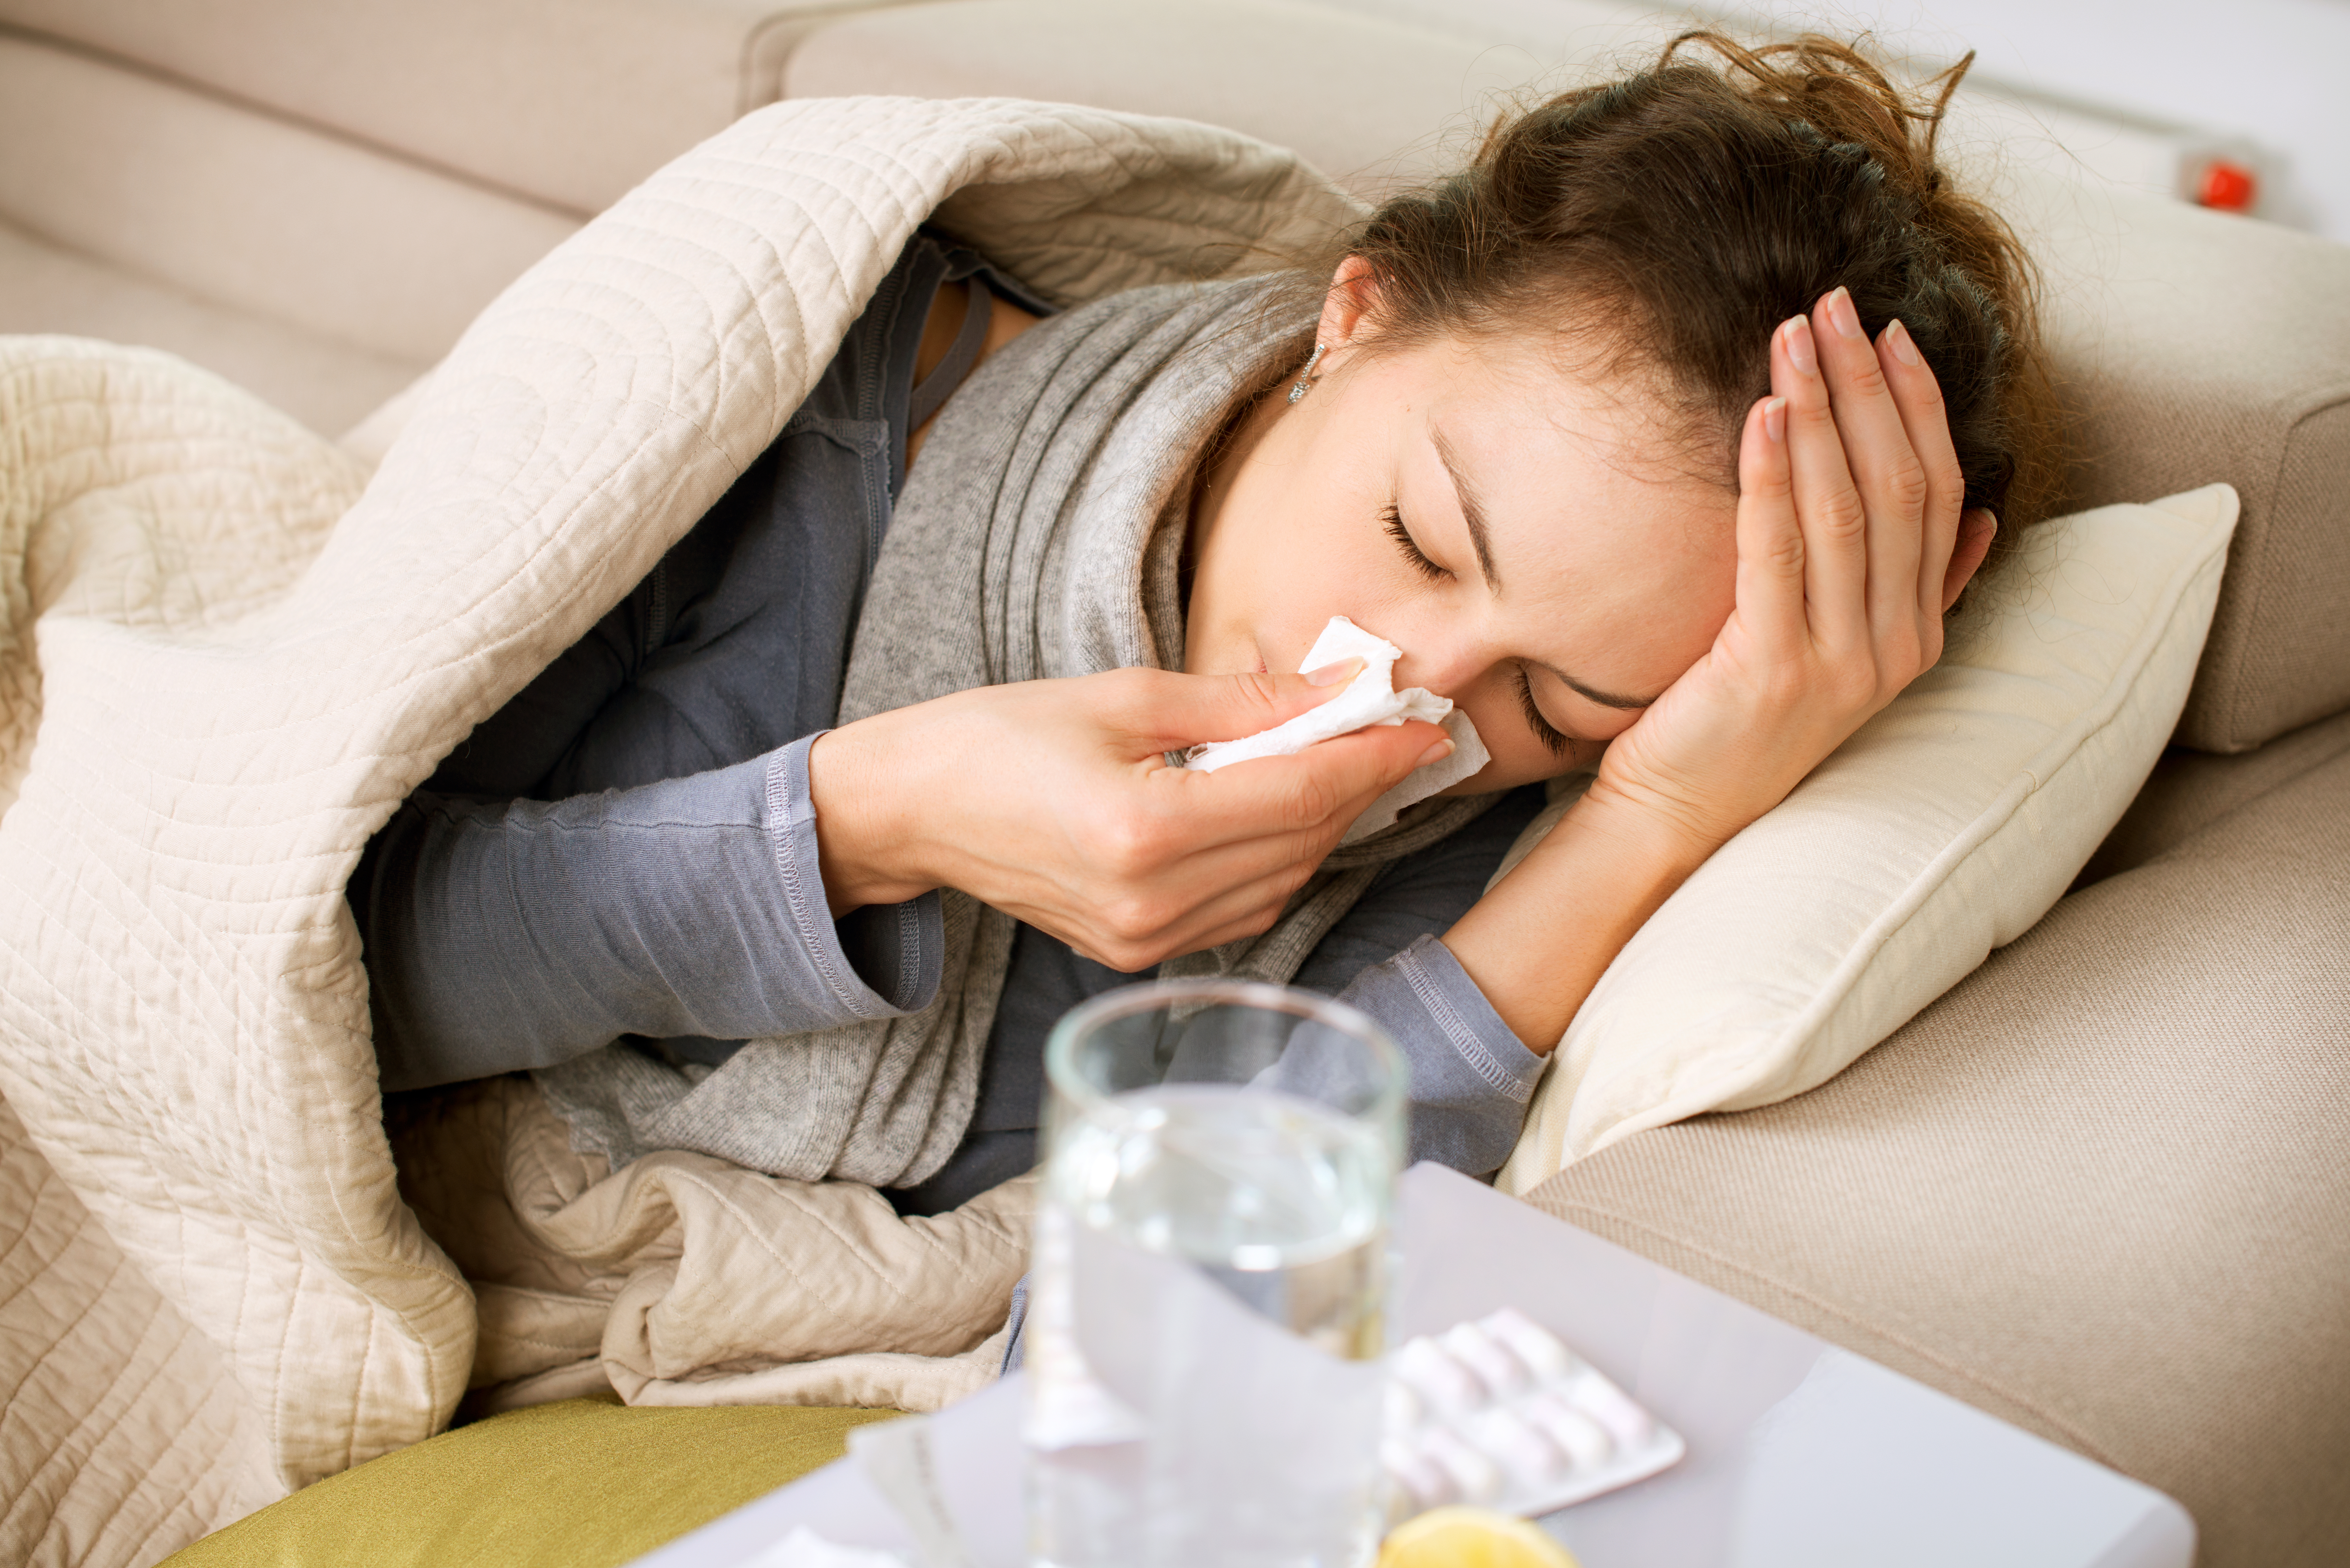 The Common Cold and the Flu: Treatment, Symptoms & Causes